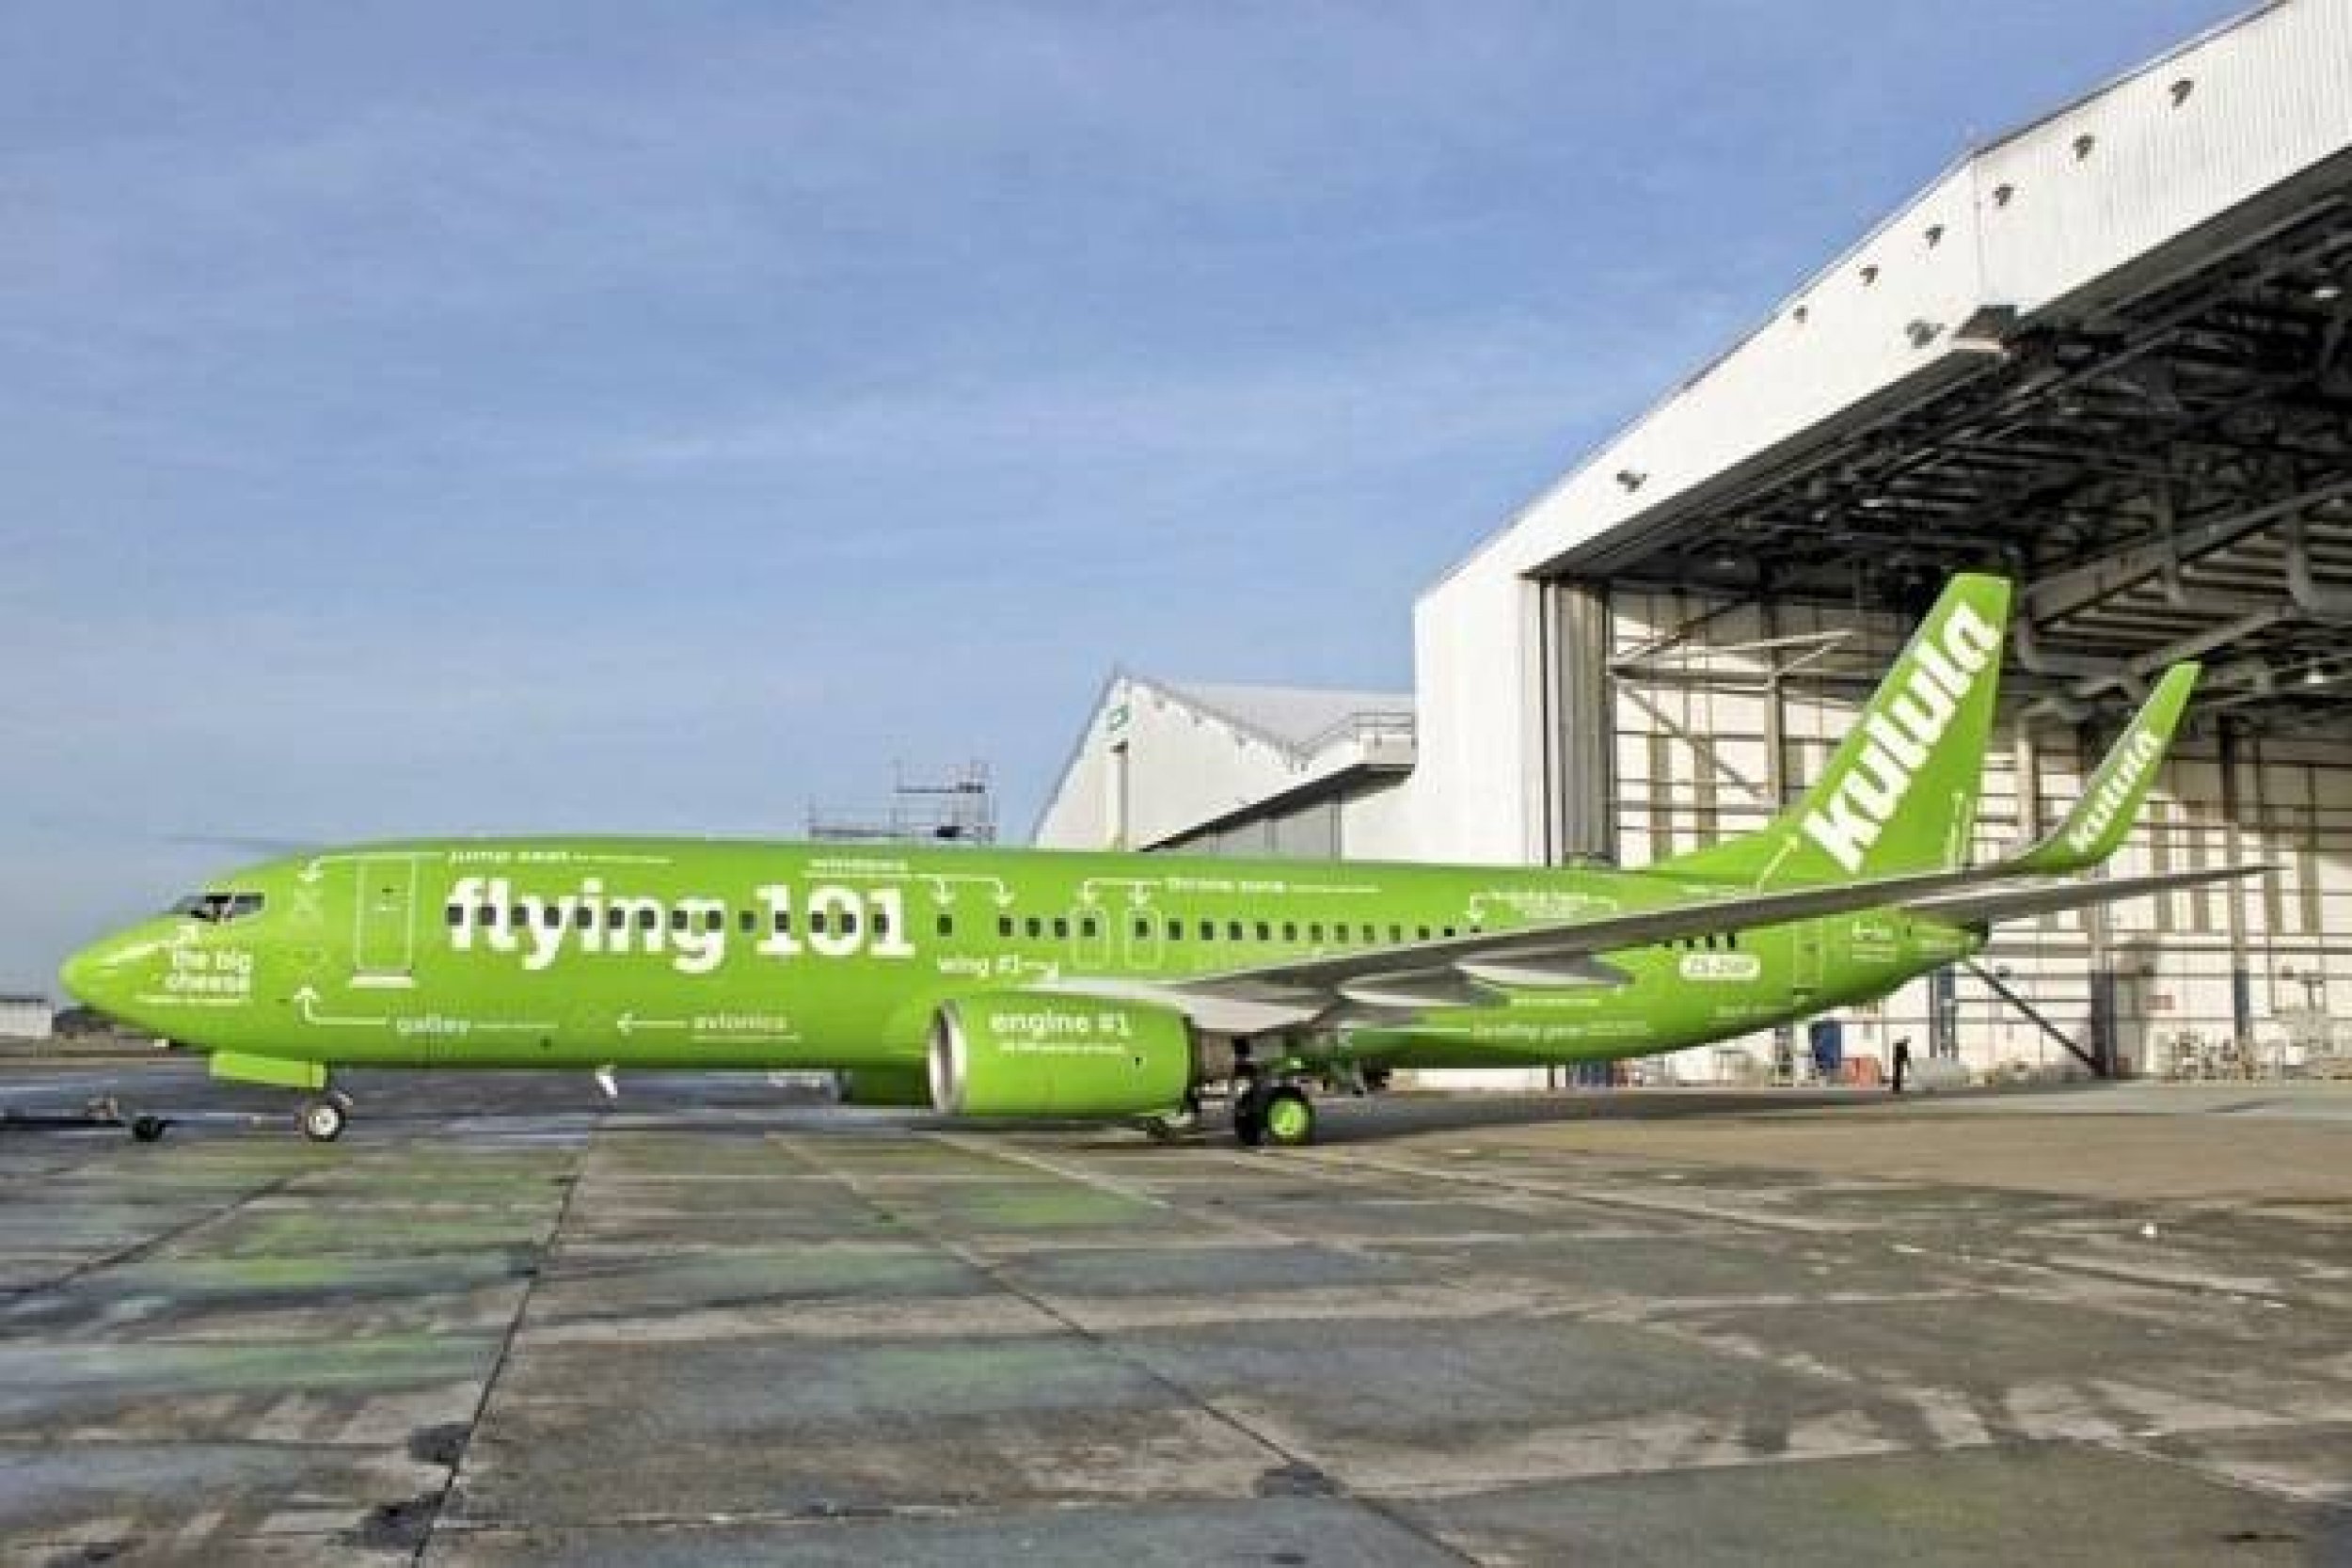 In case you didnt know the different parts of an airplane, Kulula Airlines has marked its own jet to tell you what everything is. Another view from the left side of the plane, which shows the locations of the jump seat, the avionics, and to be funny, als